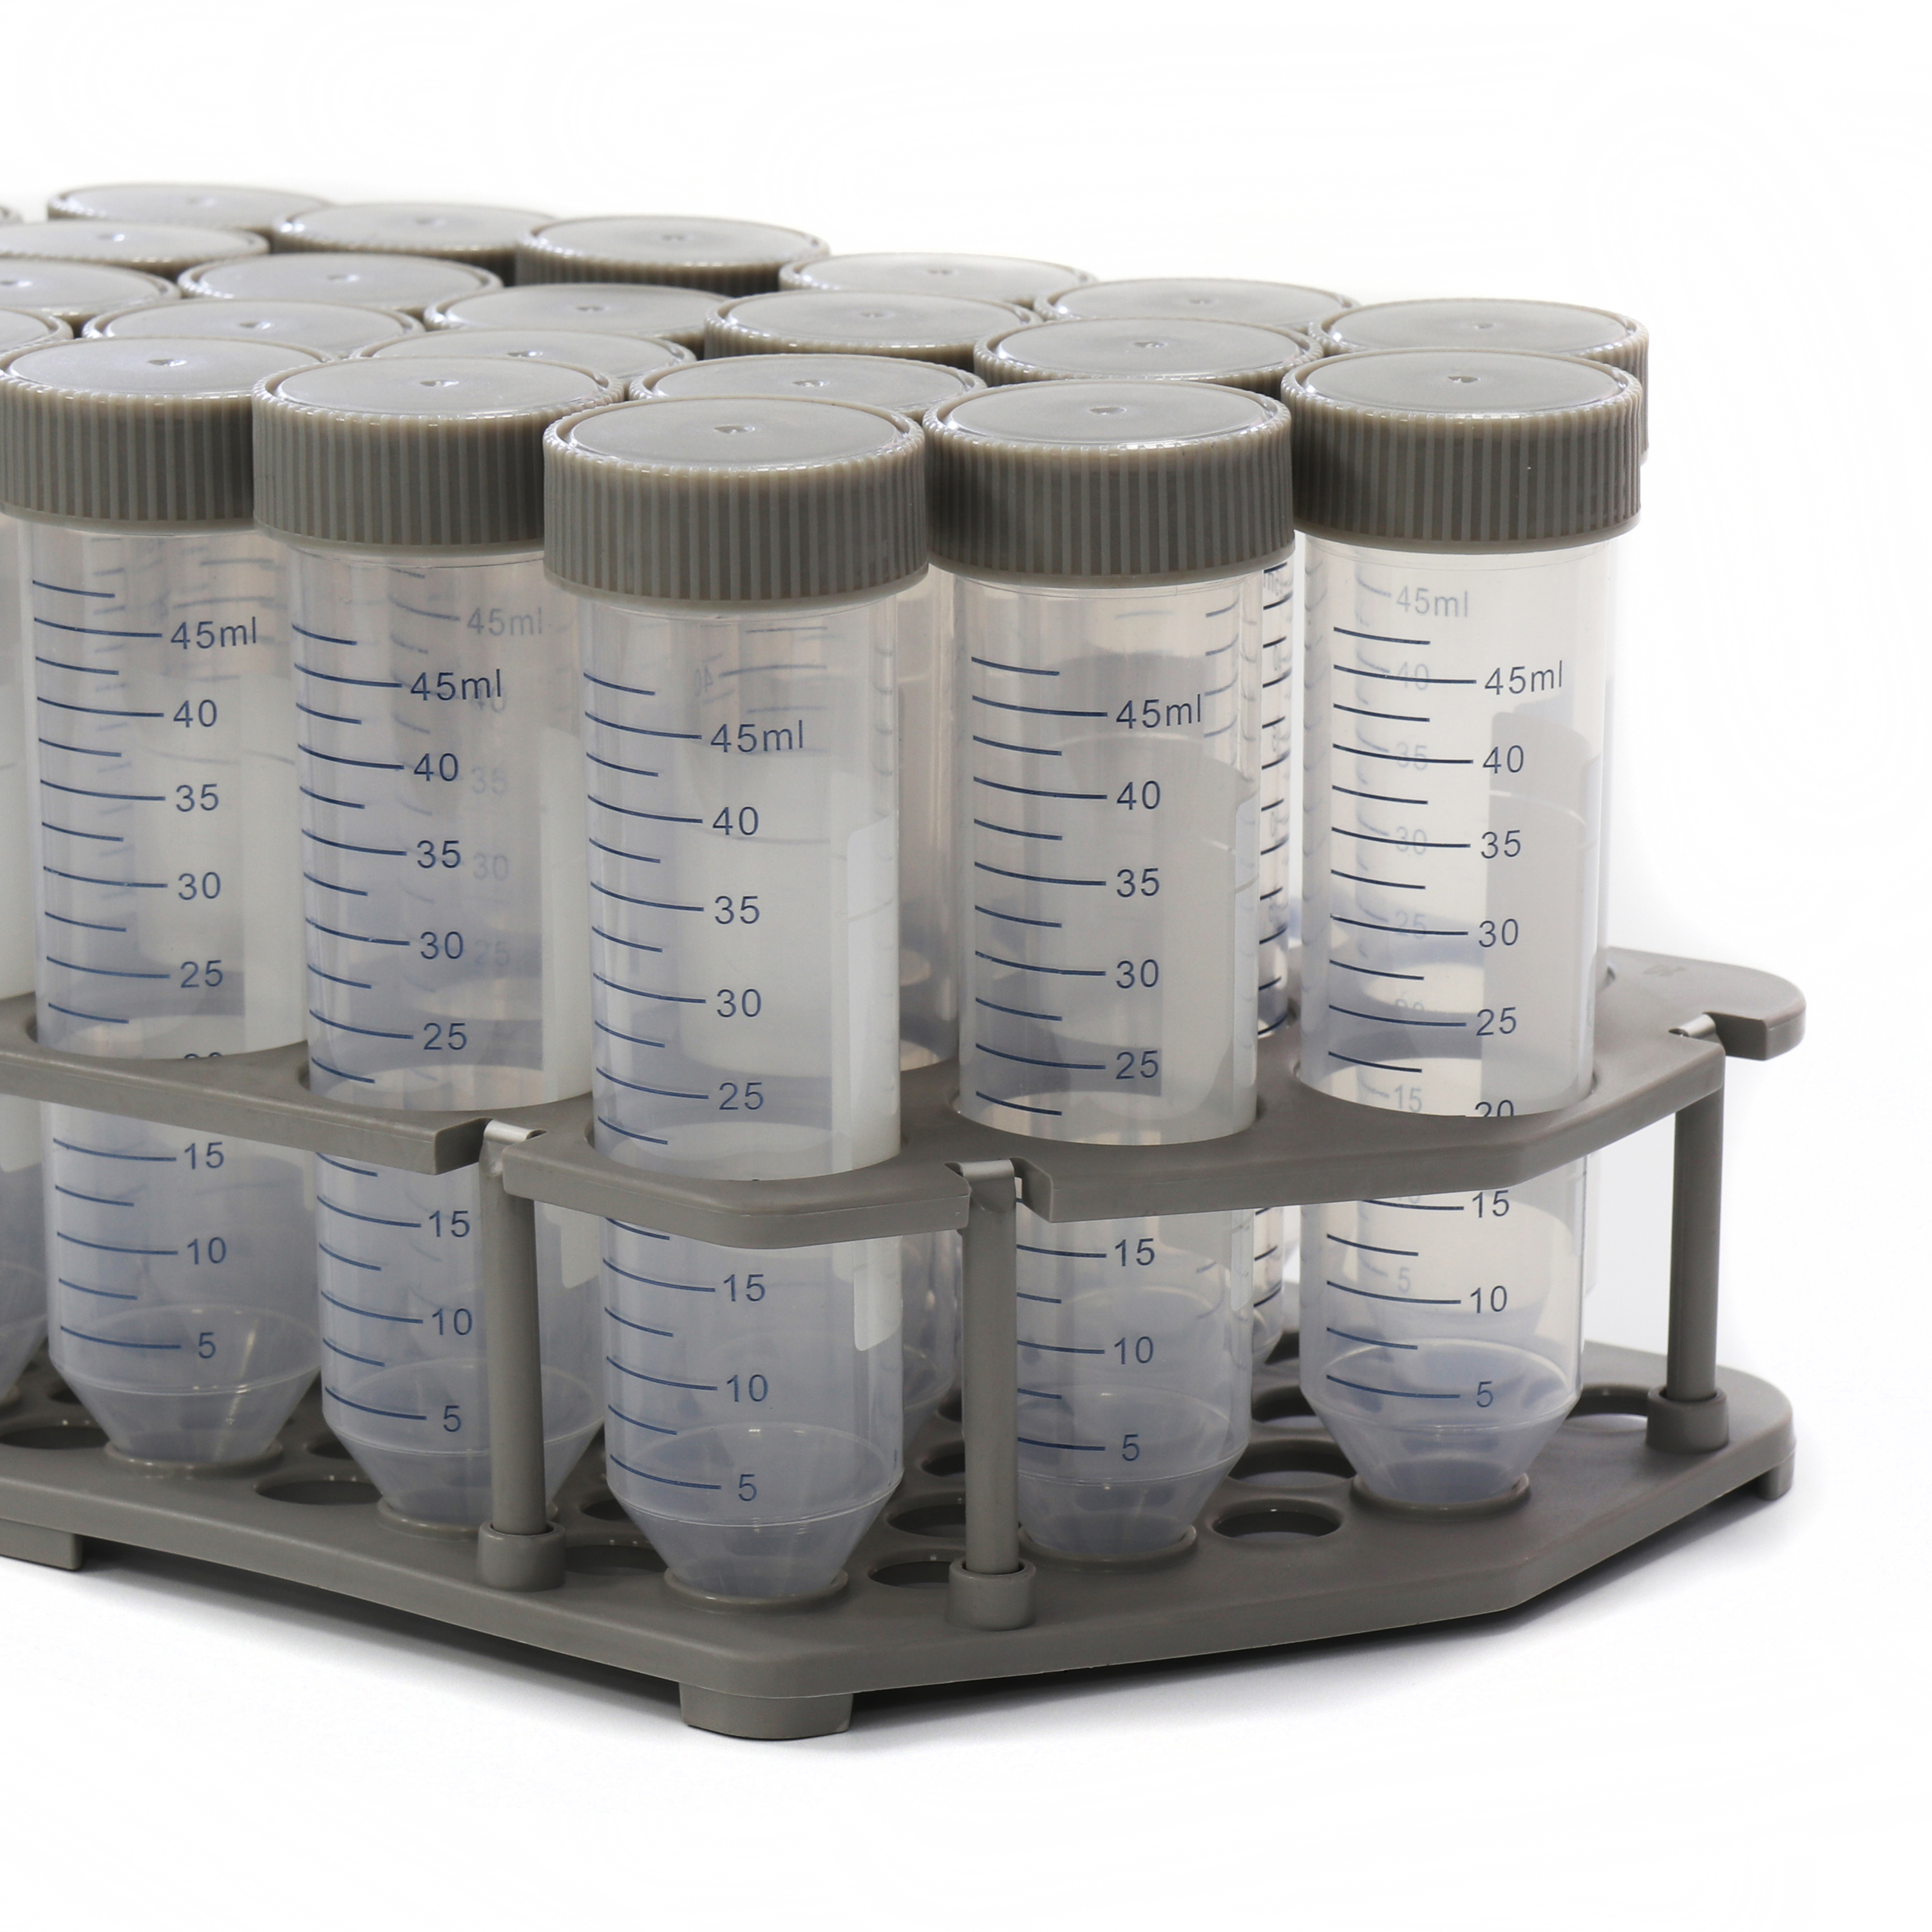 ULAB Scientific Autoclavable 50ml Conical Centrifuge Tubes